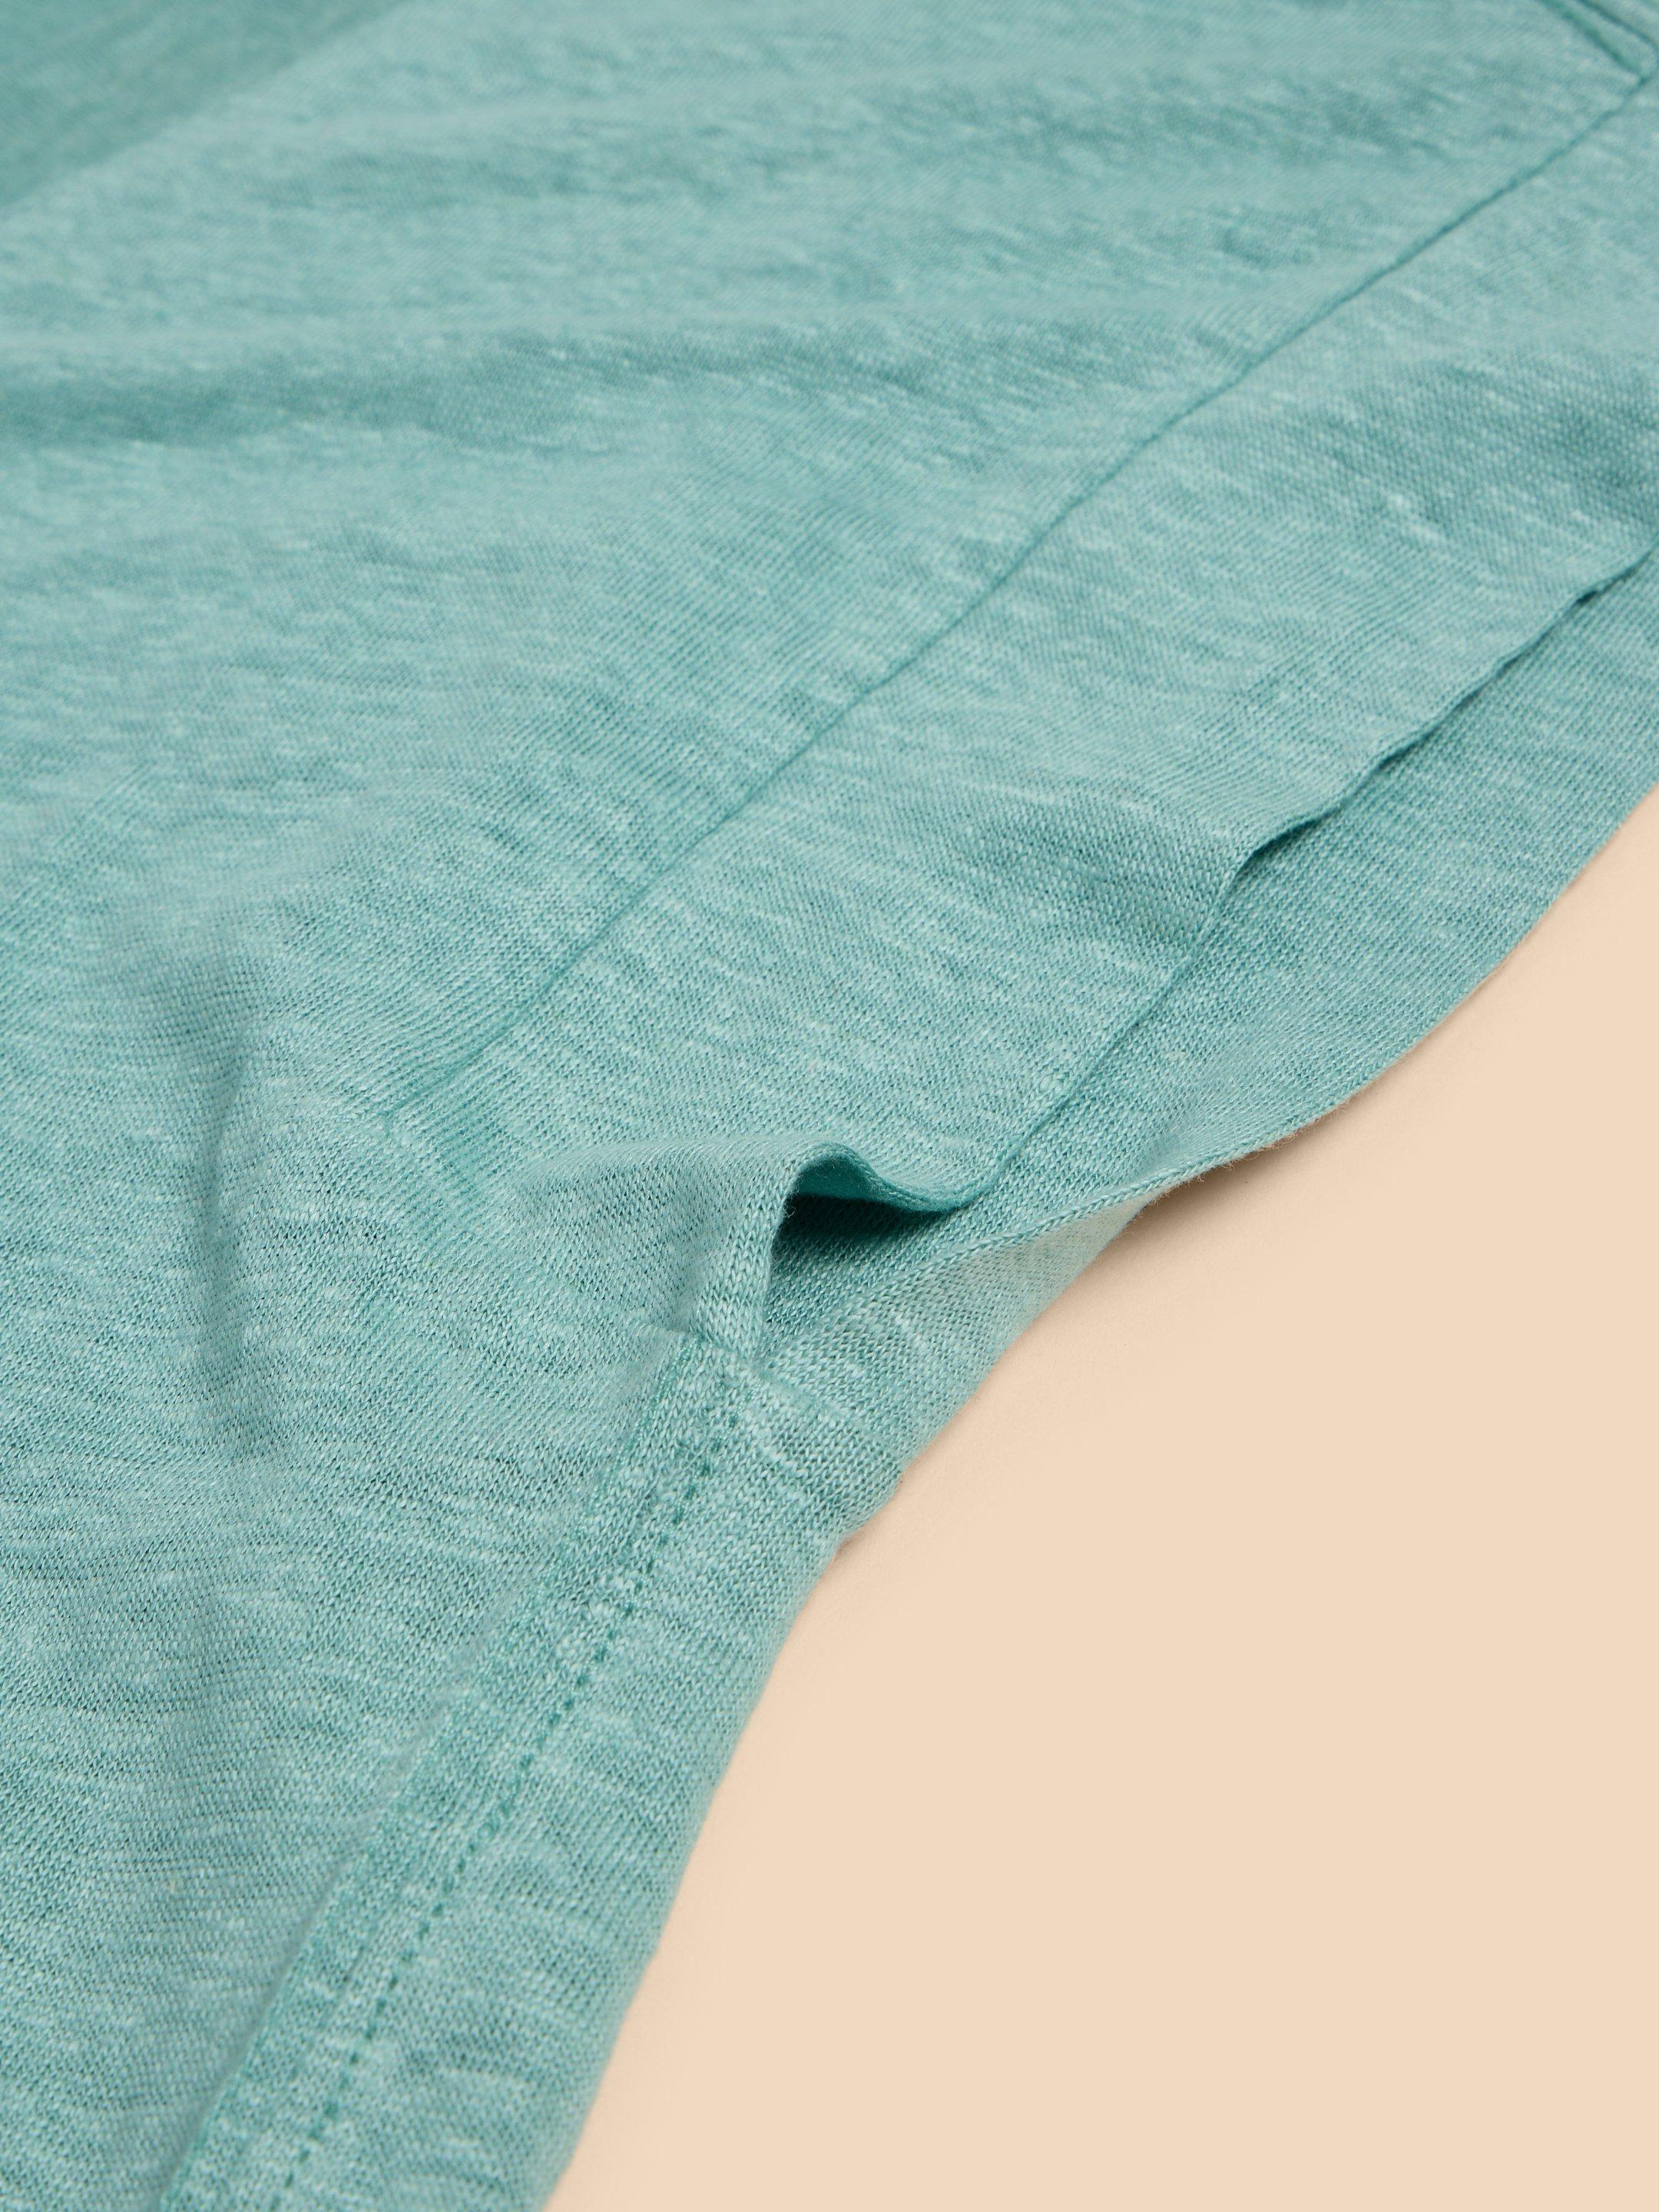 IVY LINEN TEE in MID TEAL - FLAT DETAIL